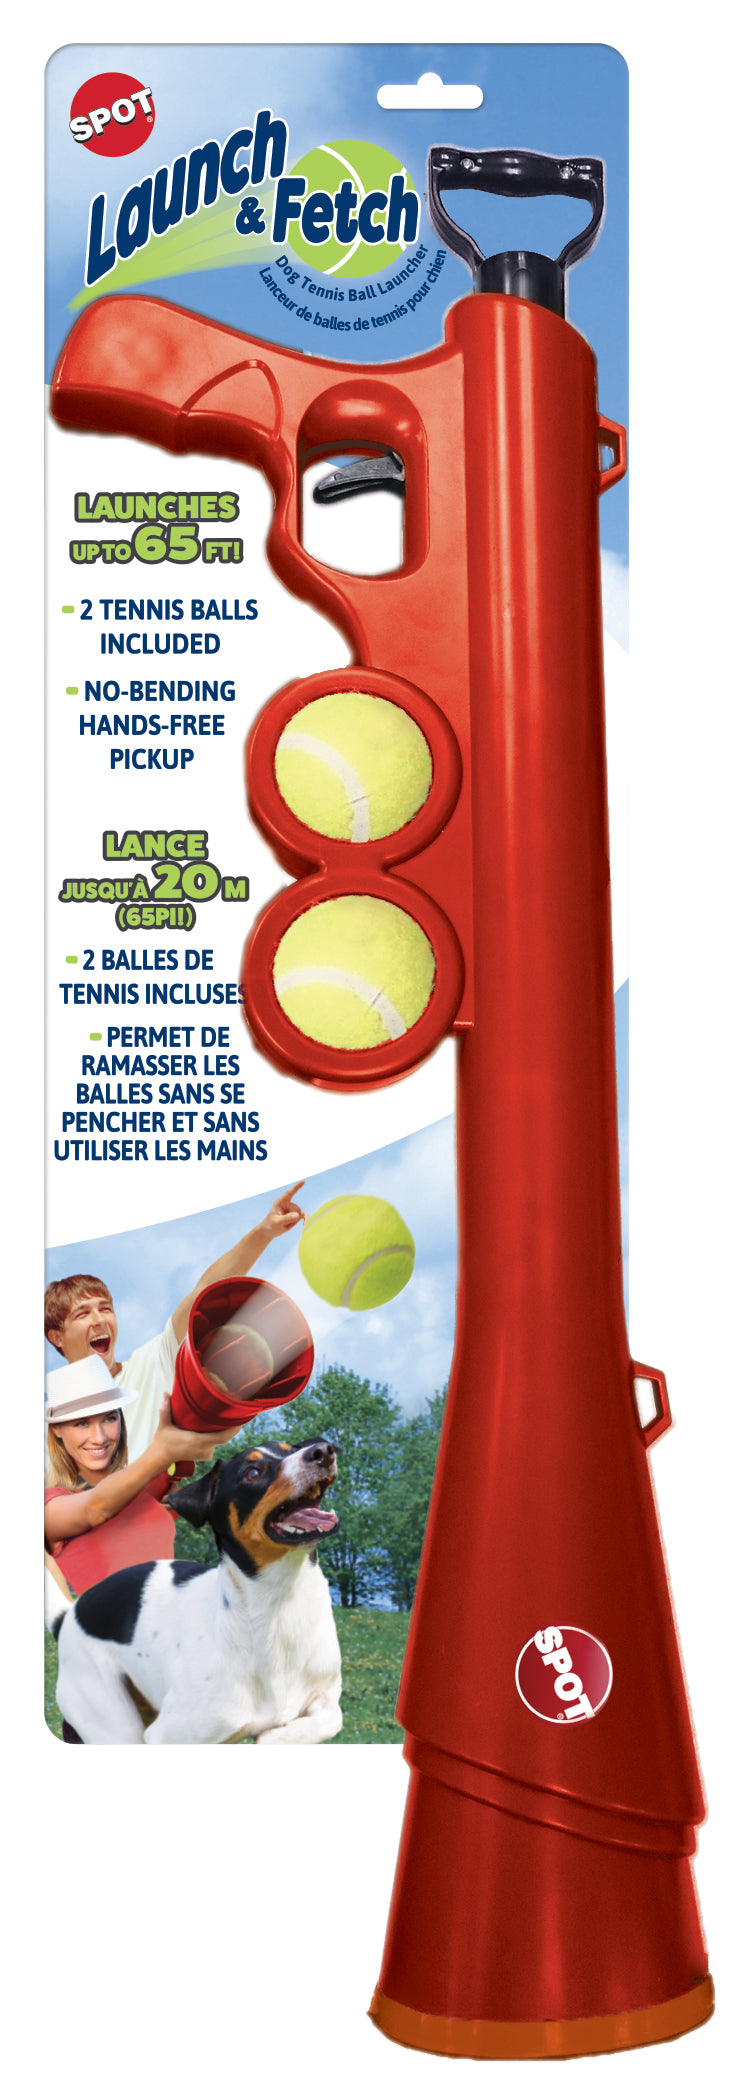 Ethical Products SPOT Launch & Fetch Tennis Ball Launcher